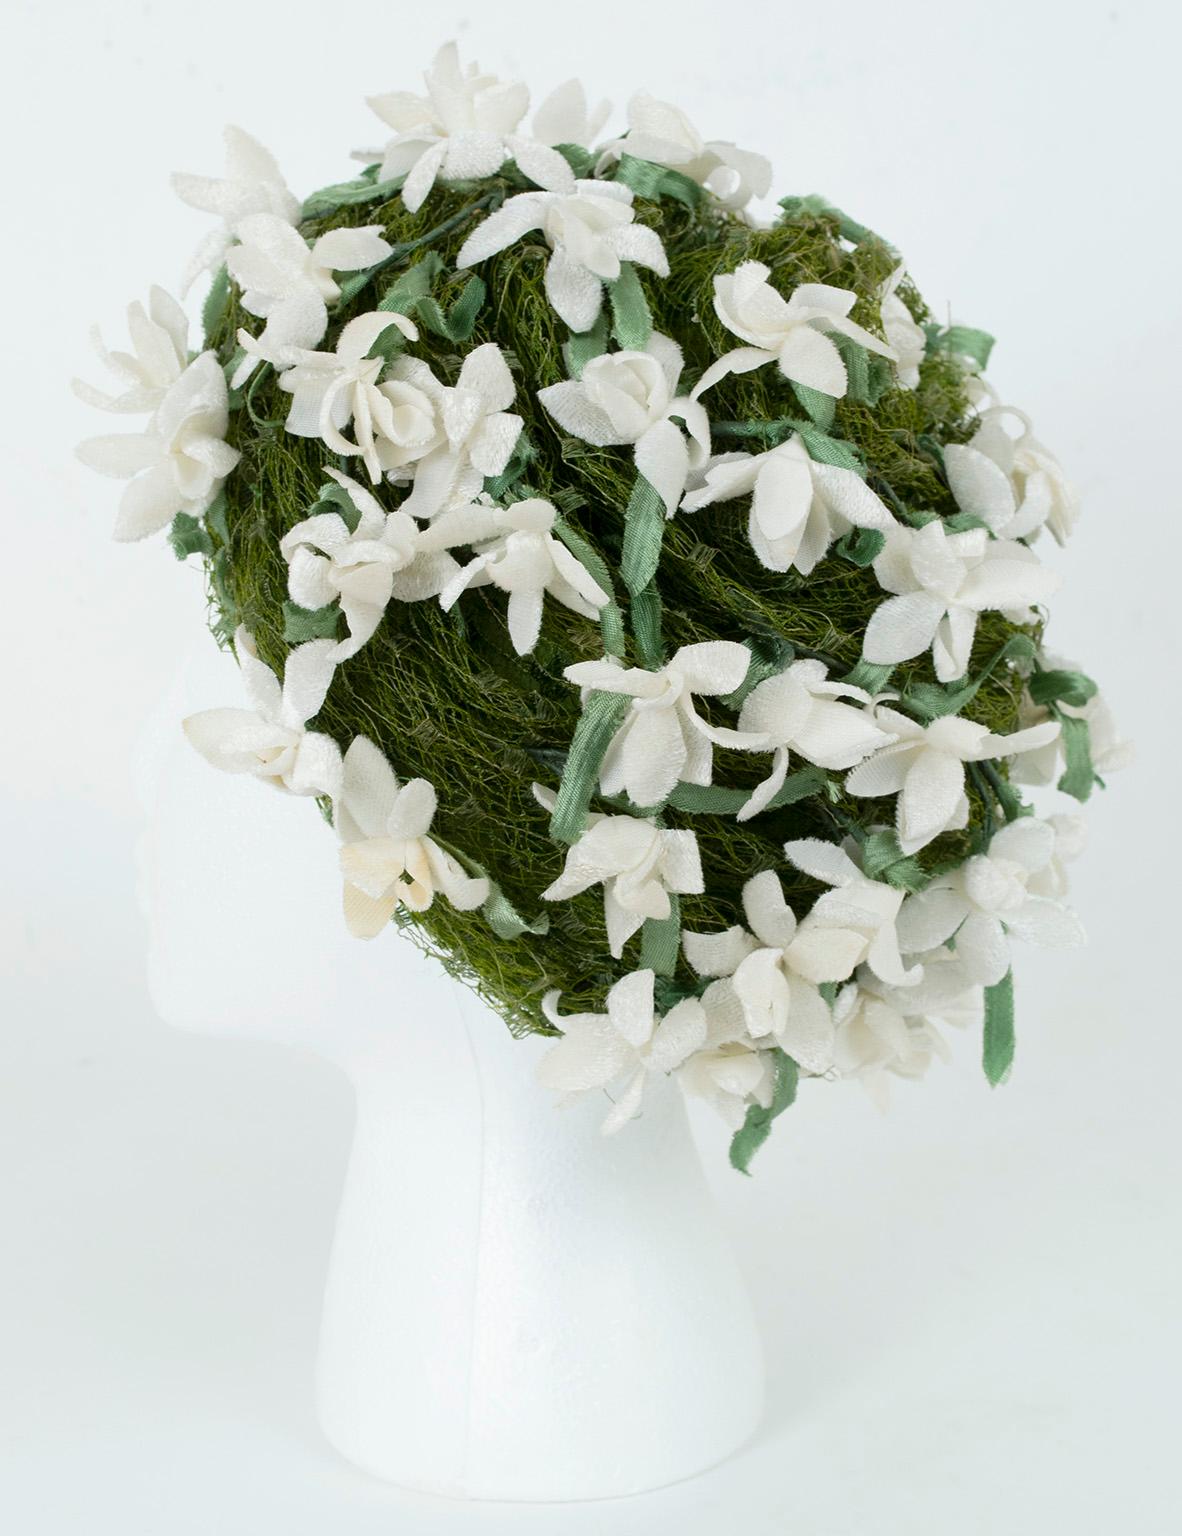 Gray Christian Dior Grass Green Beehive Turban Hat with Velvet Gardenias – S-M, 1950s For Sale